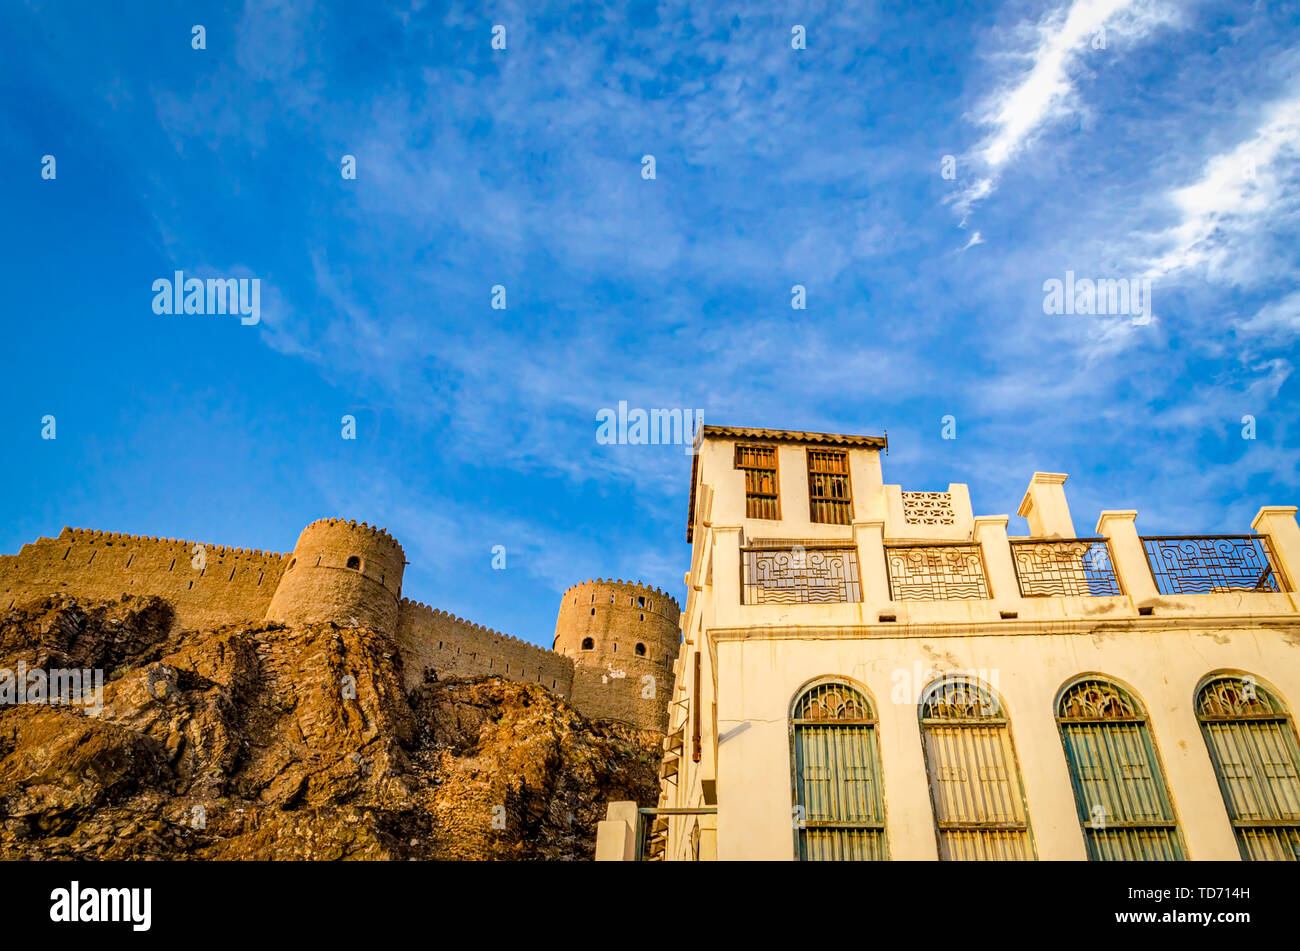 Majestic Muttrah fort adjacent to an old and abandoned house. From Muscat, Oman. Stock Photo